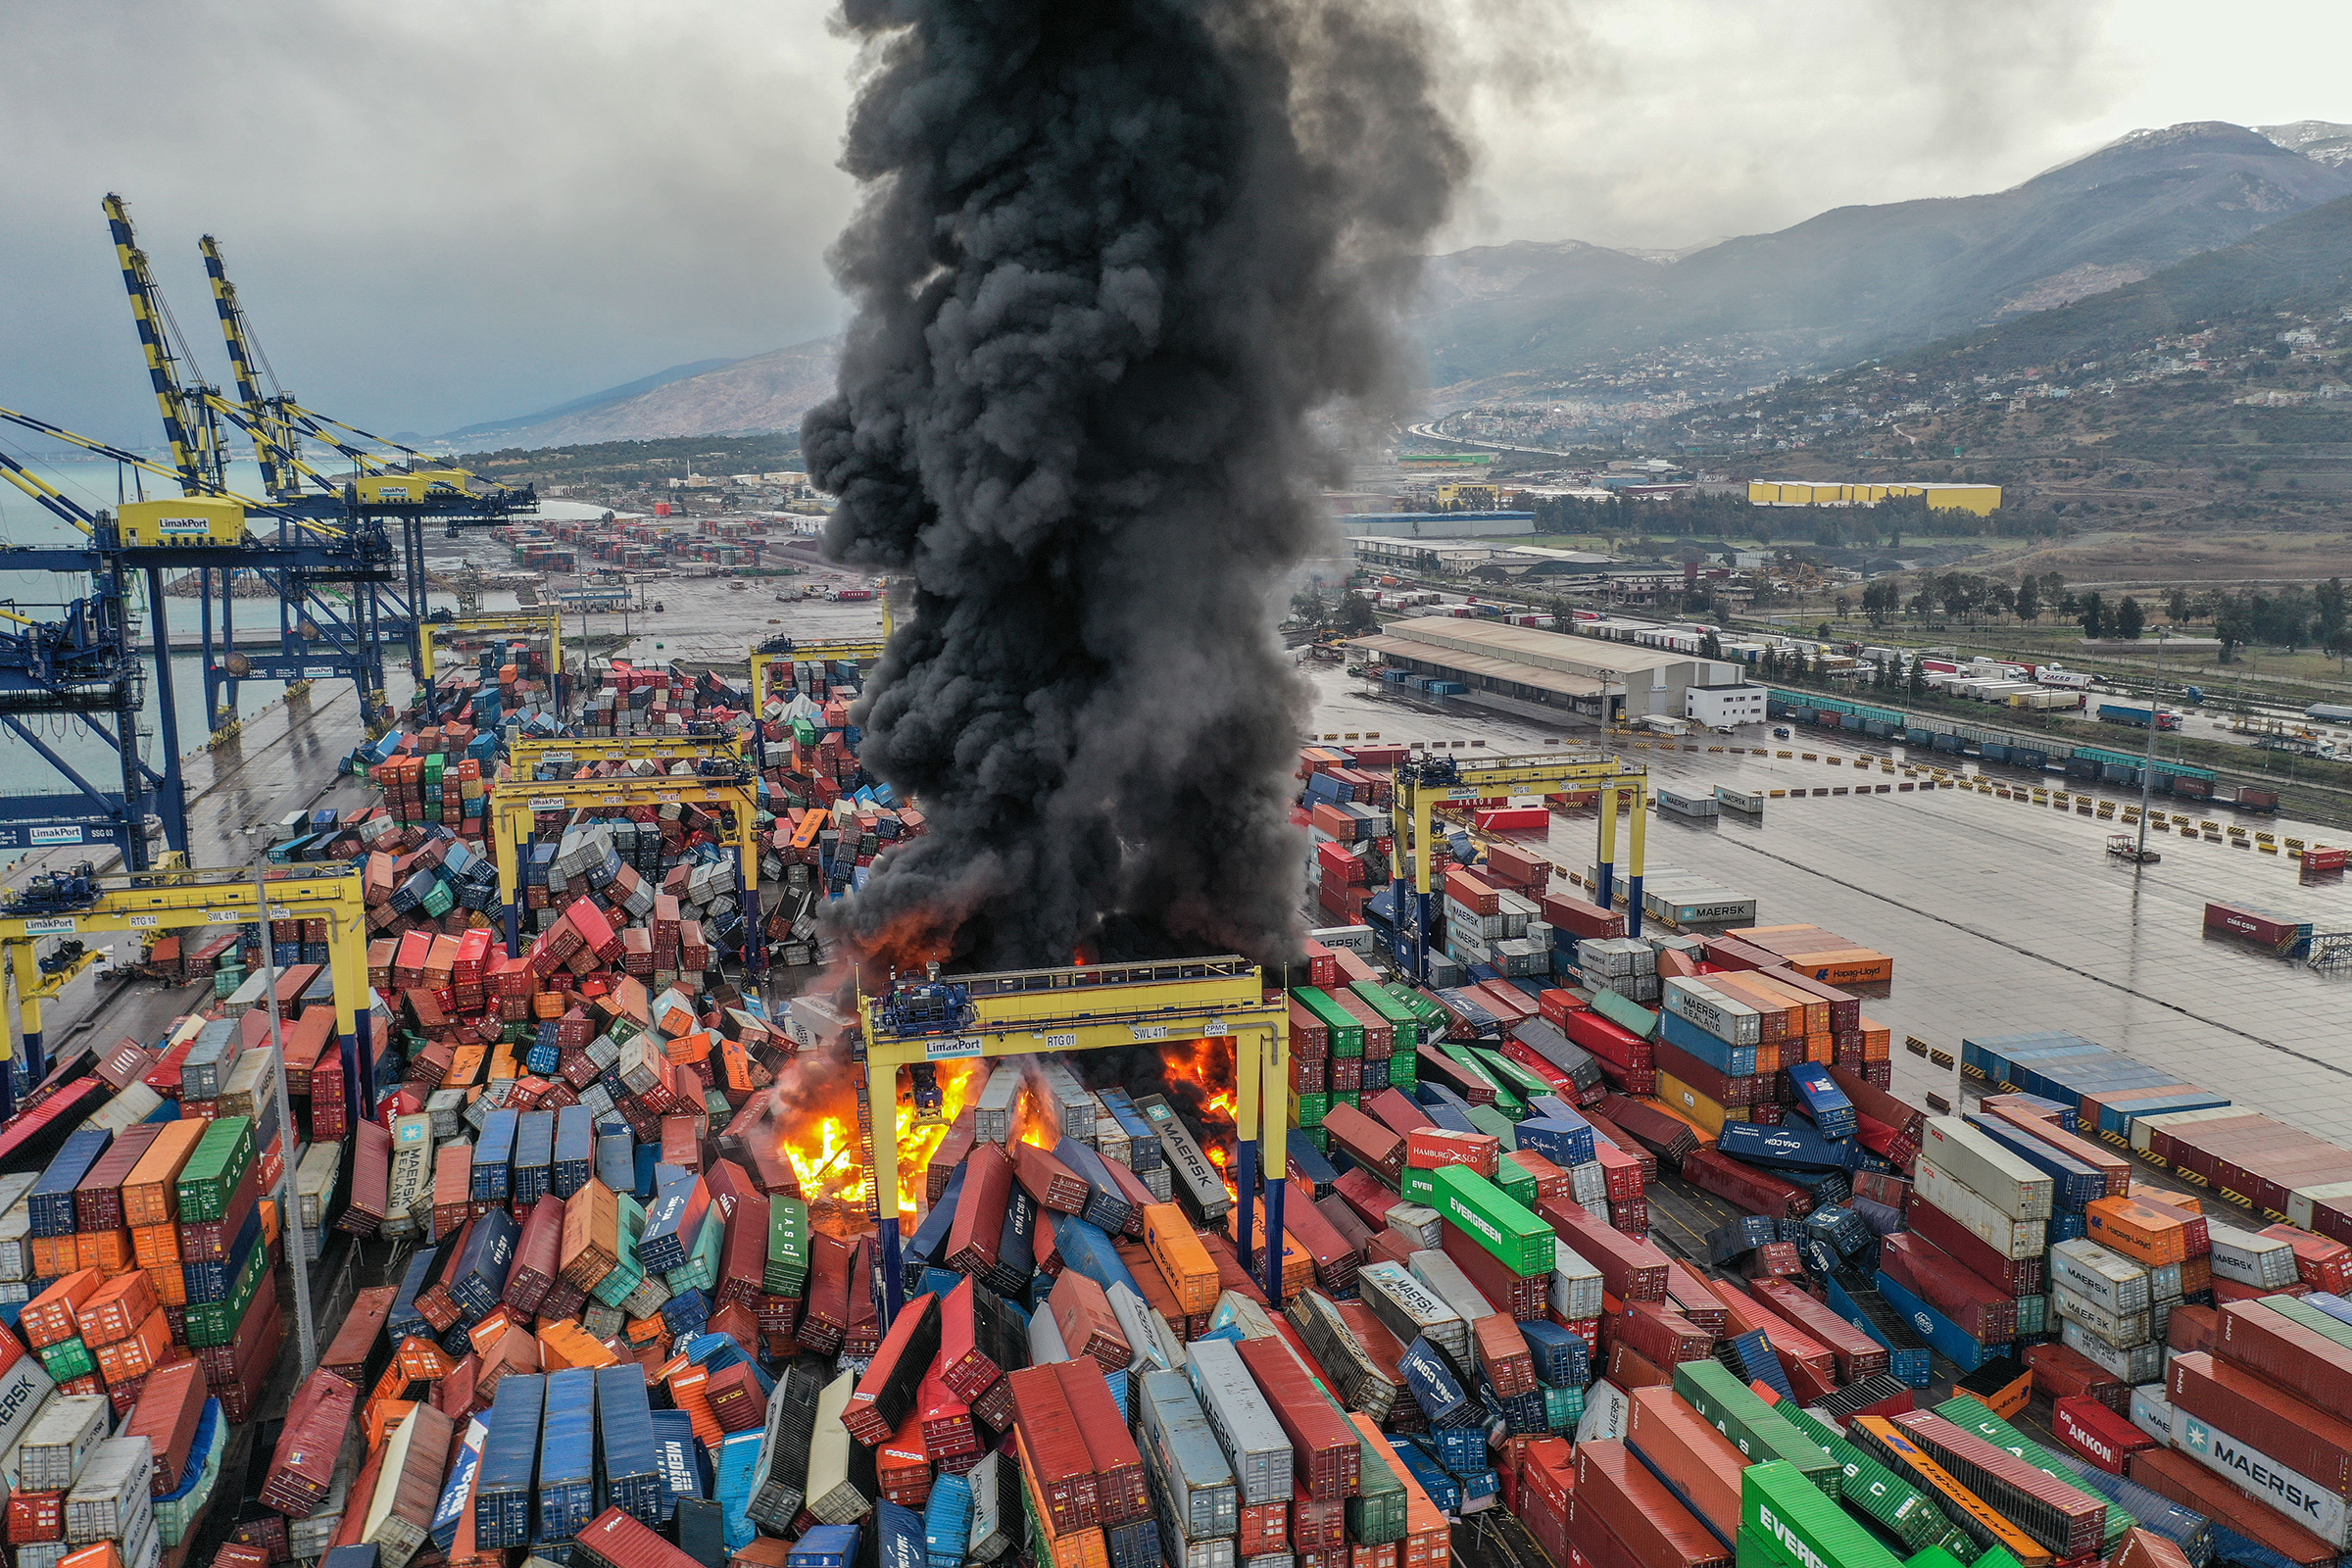 An aerial view of shipping containers on fire after an the earthquakes in Hatay, Turkey. (Murat Sengul—Anadolu Agency/Getty Images)